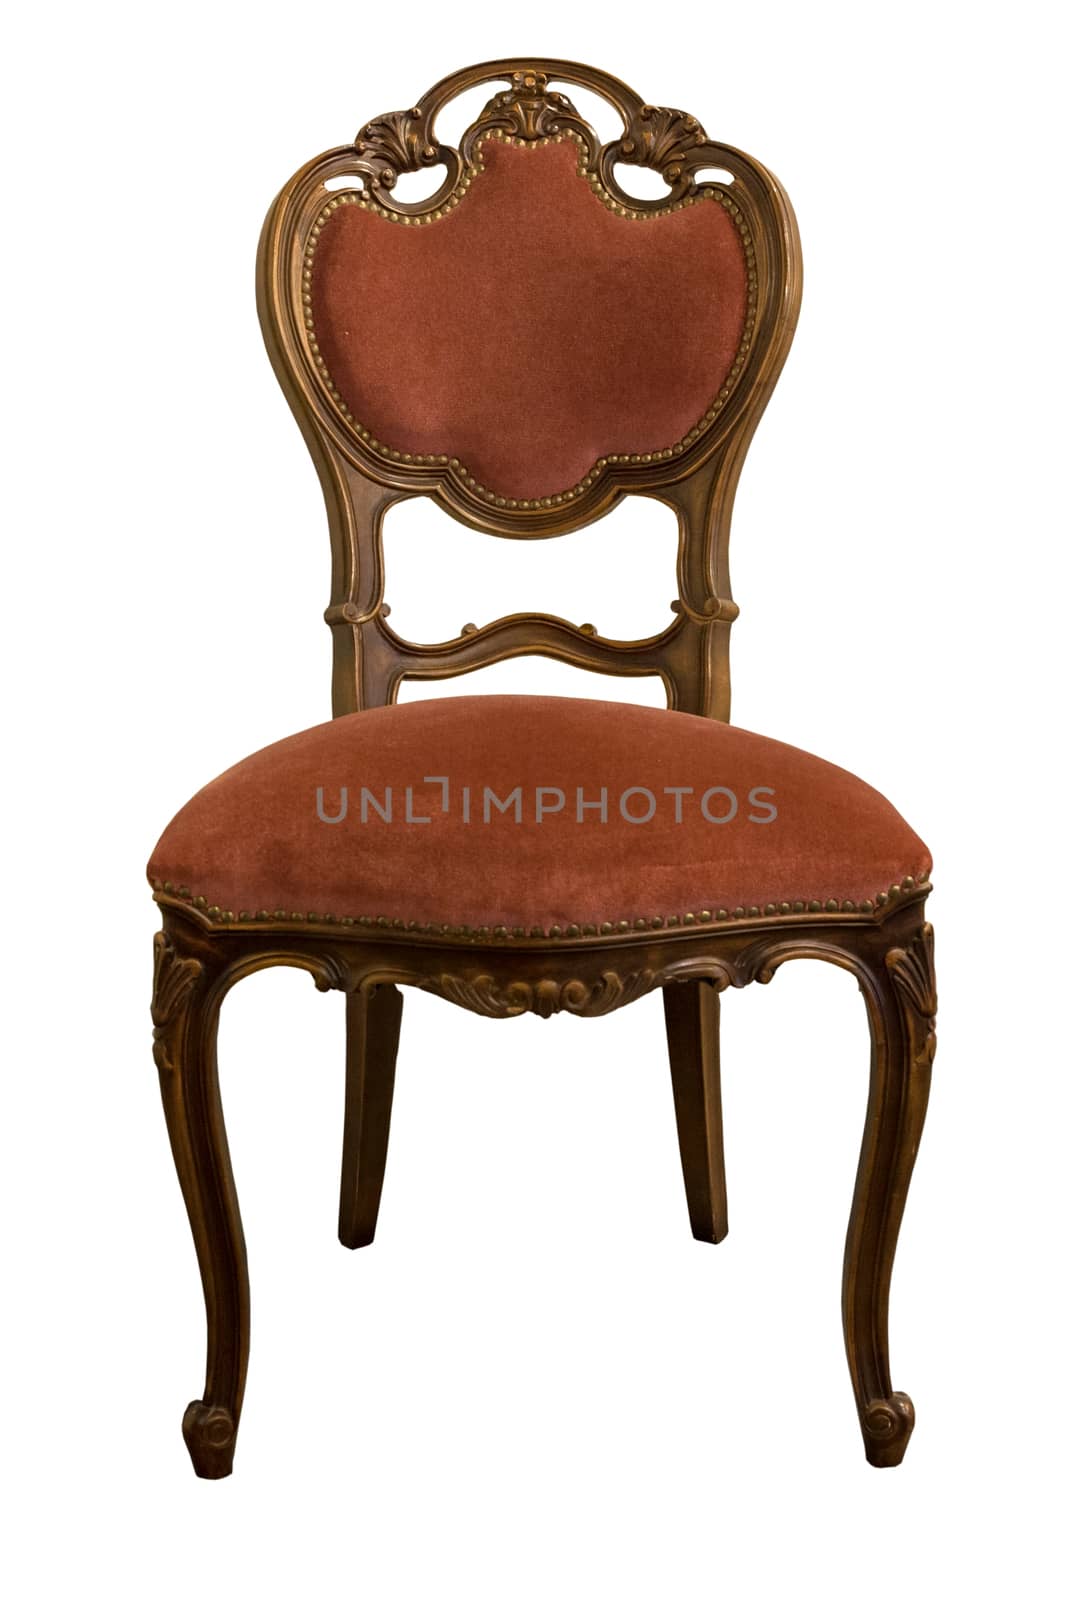 French XIX century antique furniture made from oak wood isolated on white.